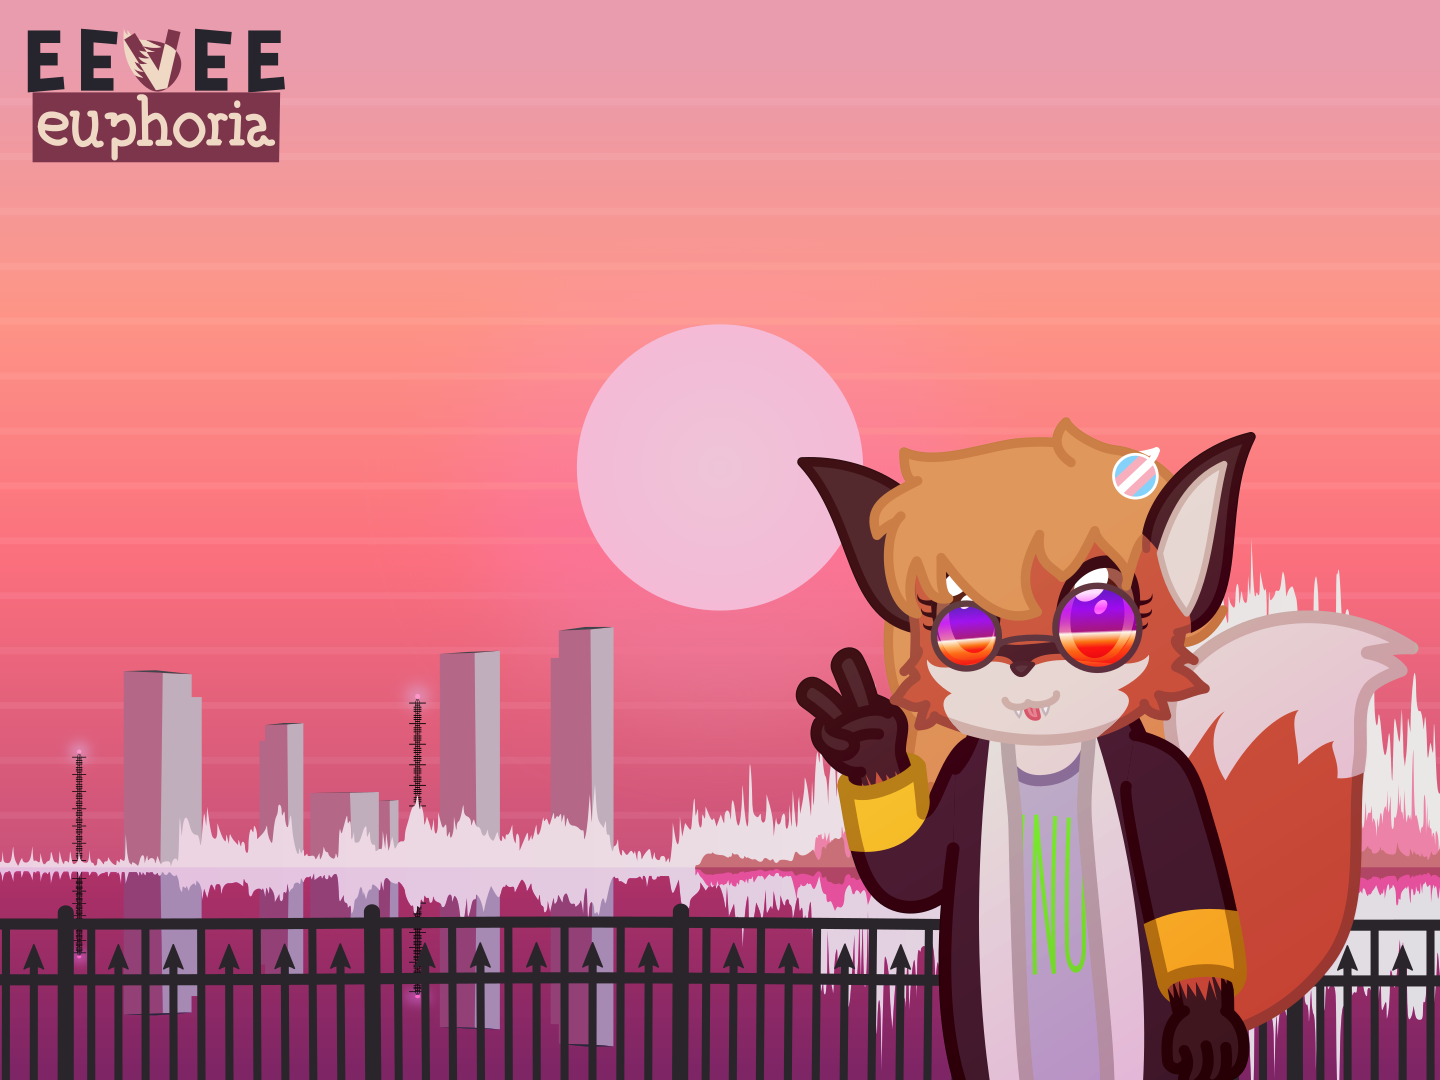 xenia sticks her tongue out and holds a peace sign against a orangey pink sky, with the sun center in frame. there is a city in the distance, and a mountain that is very jagged, looking like audio wave forms